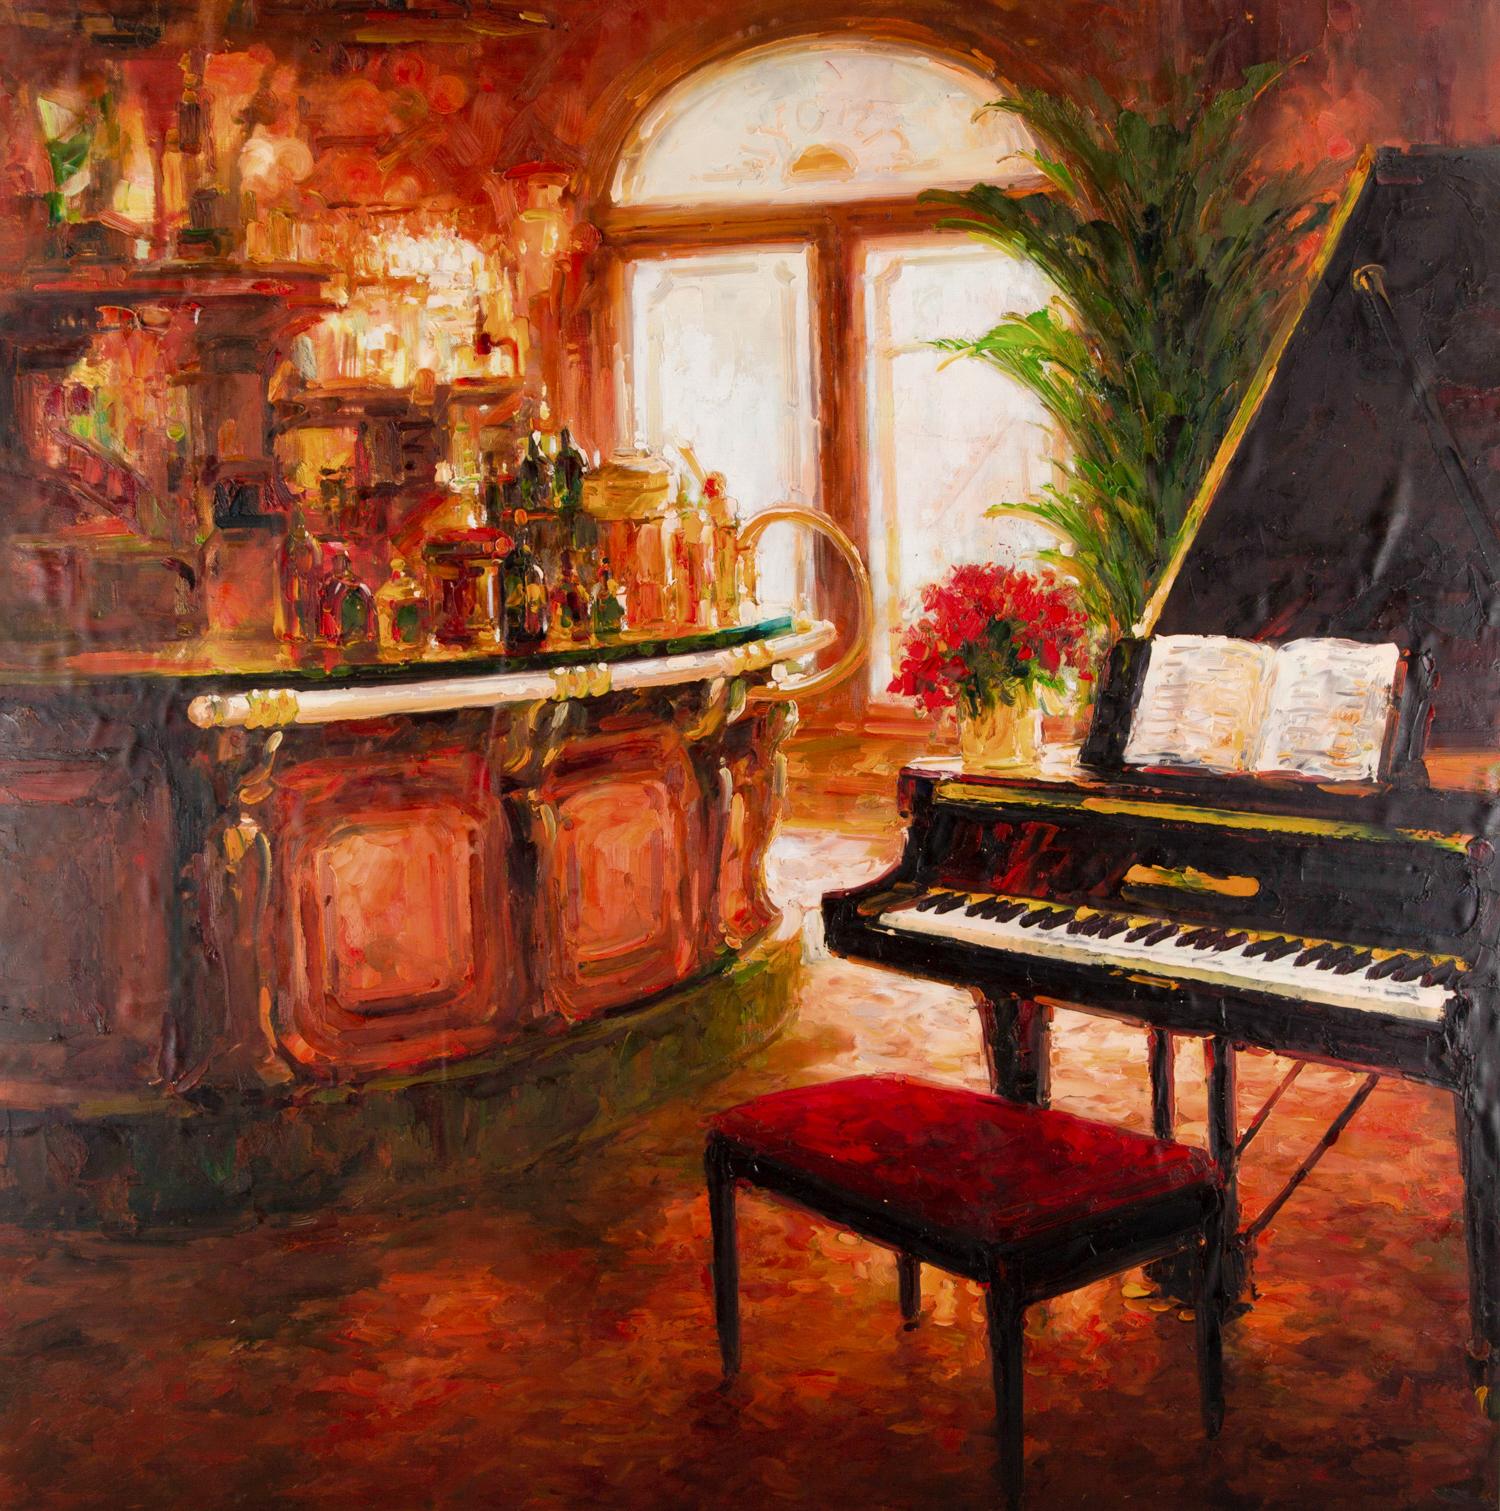  Title: Bar 3
 Medium: Oil on canvas
 Size: 36 x 36 inches
 Frame: Framing options available!
 Condition: The painting is laid on the matt board and appears to be in excellent condition.
 
 Year: 2000 Circa
 Artist: Lin Hongdan 
 Signature: